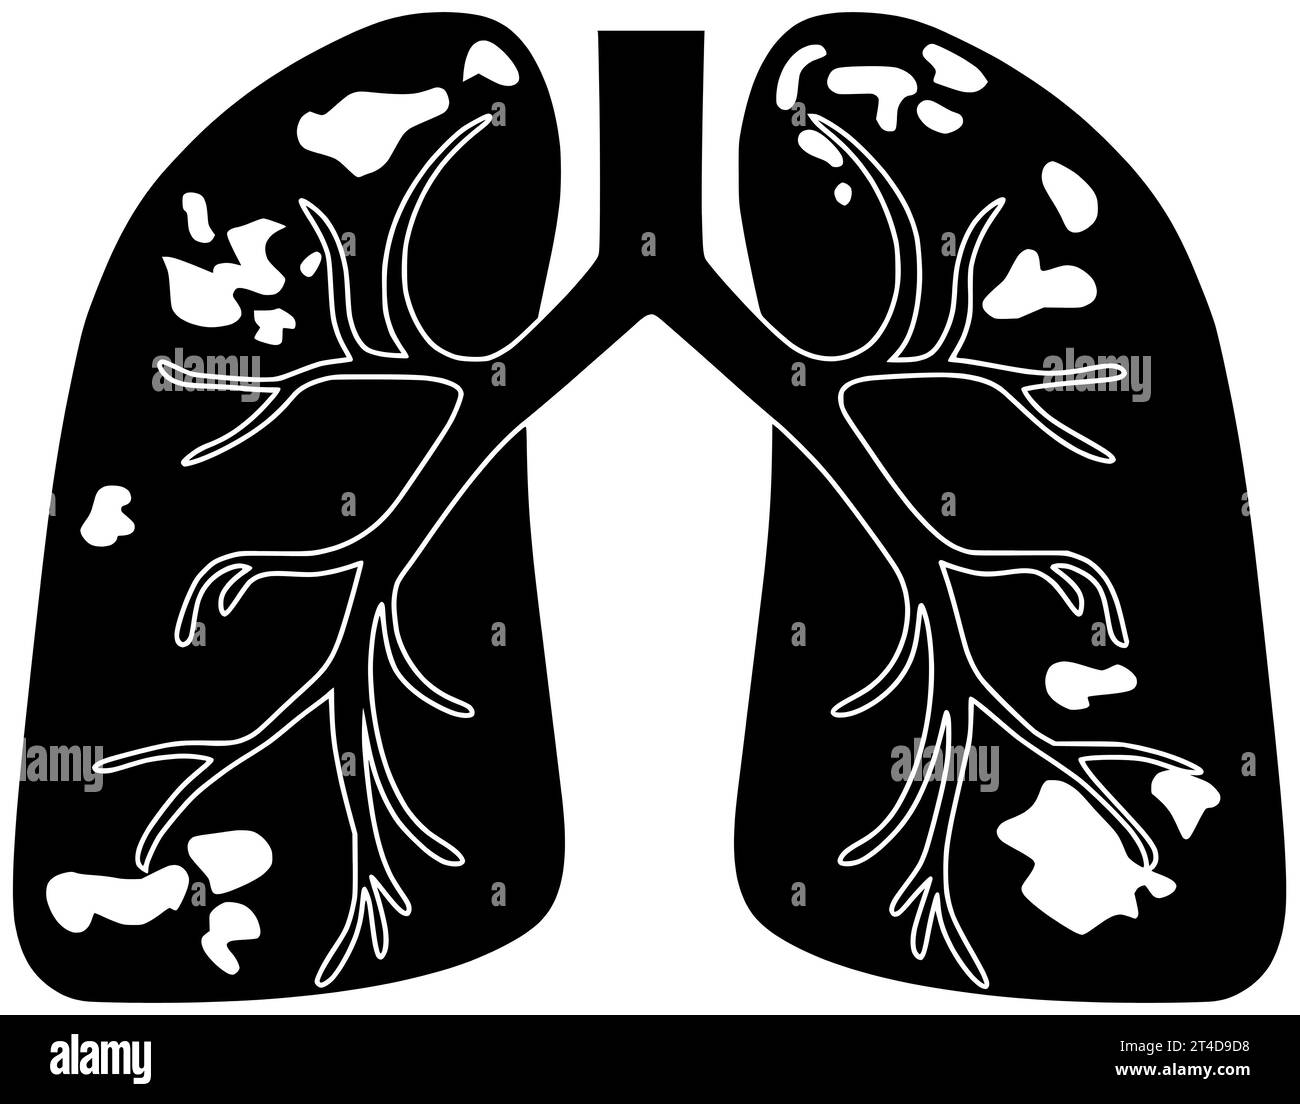 disease black pneumonia silhouette respiratory illustration pulmonary icon virus logo lung asthma care health cancer infection copd bronchitis tuberculosis medical Stock Photo